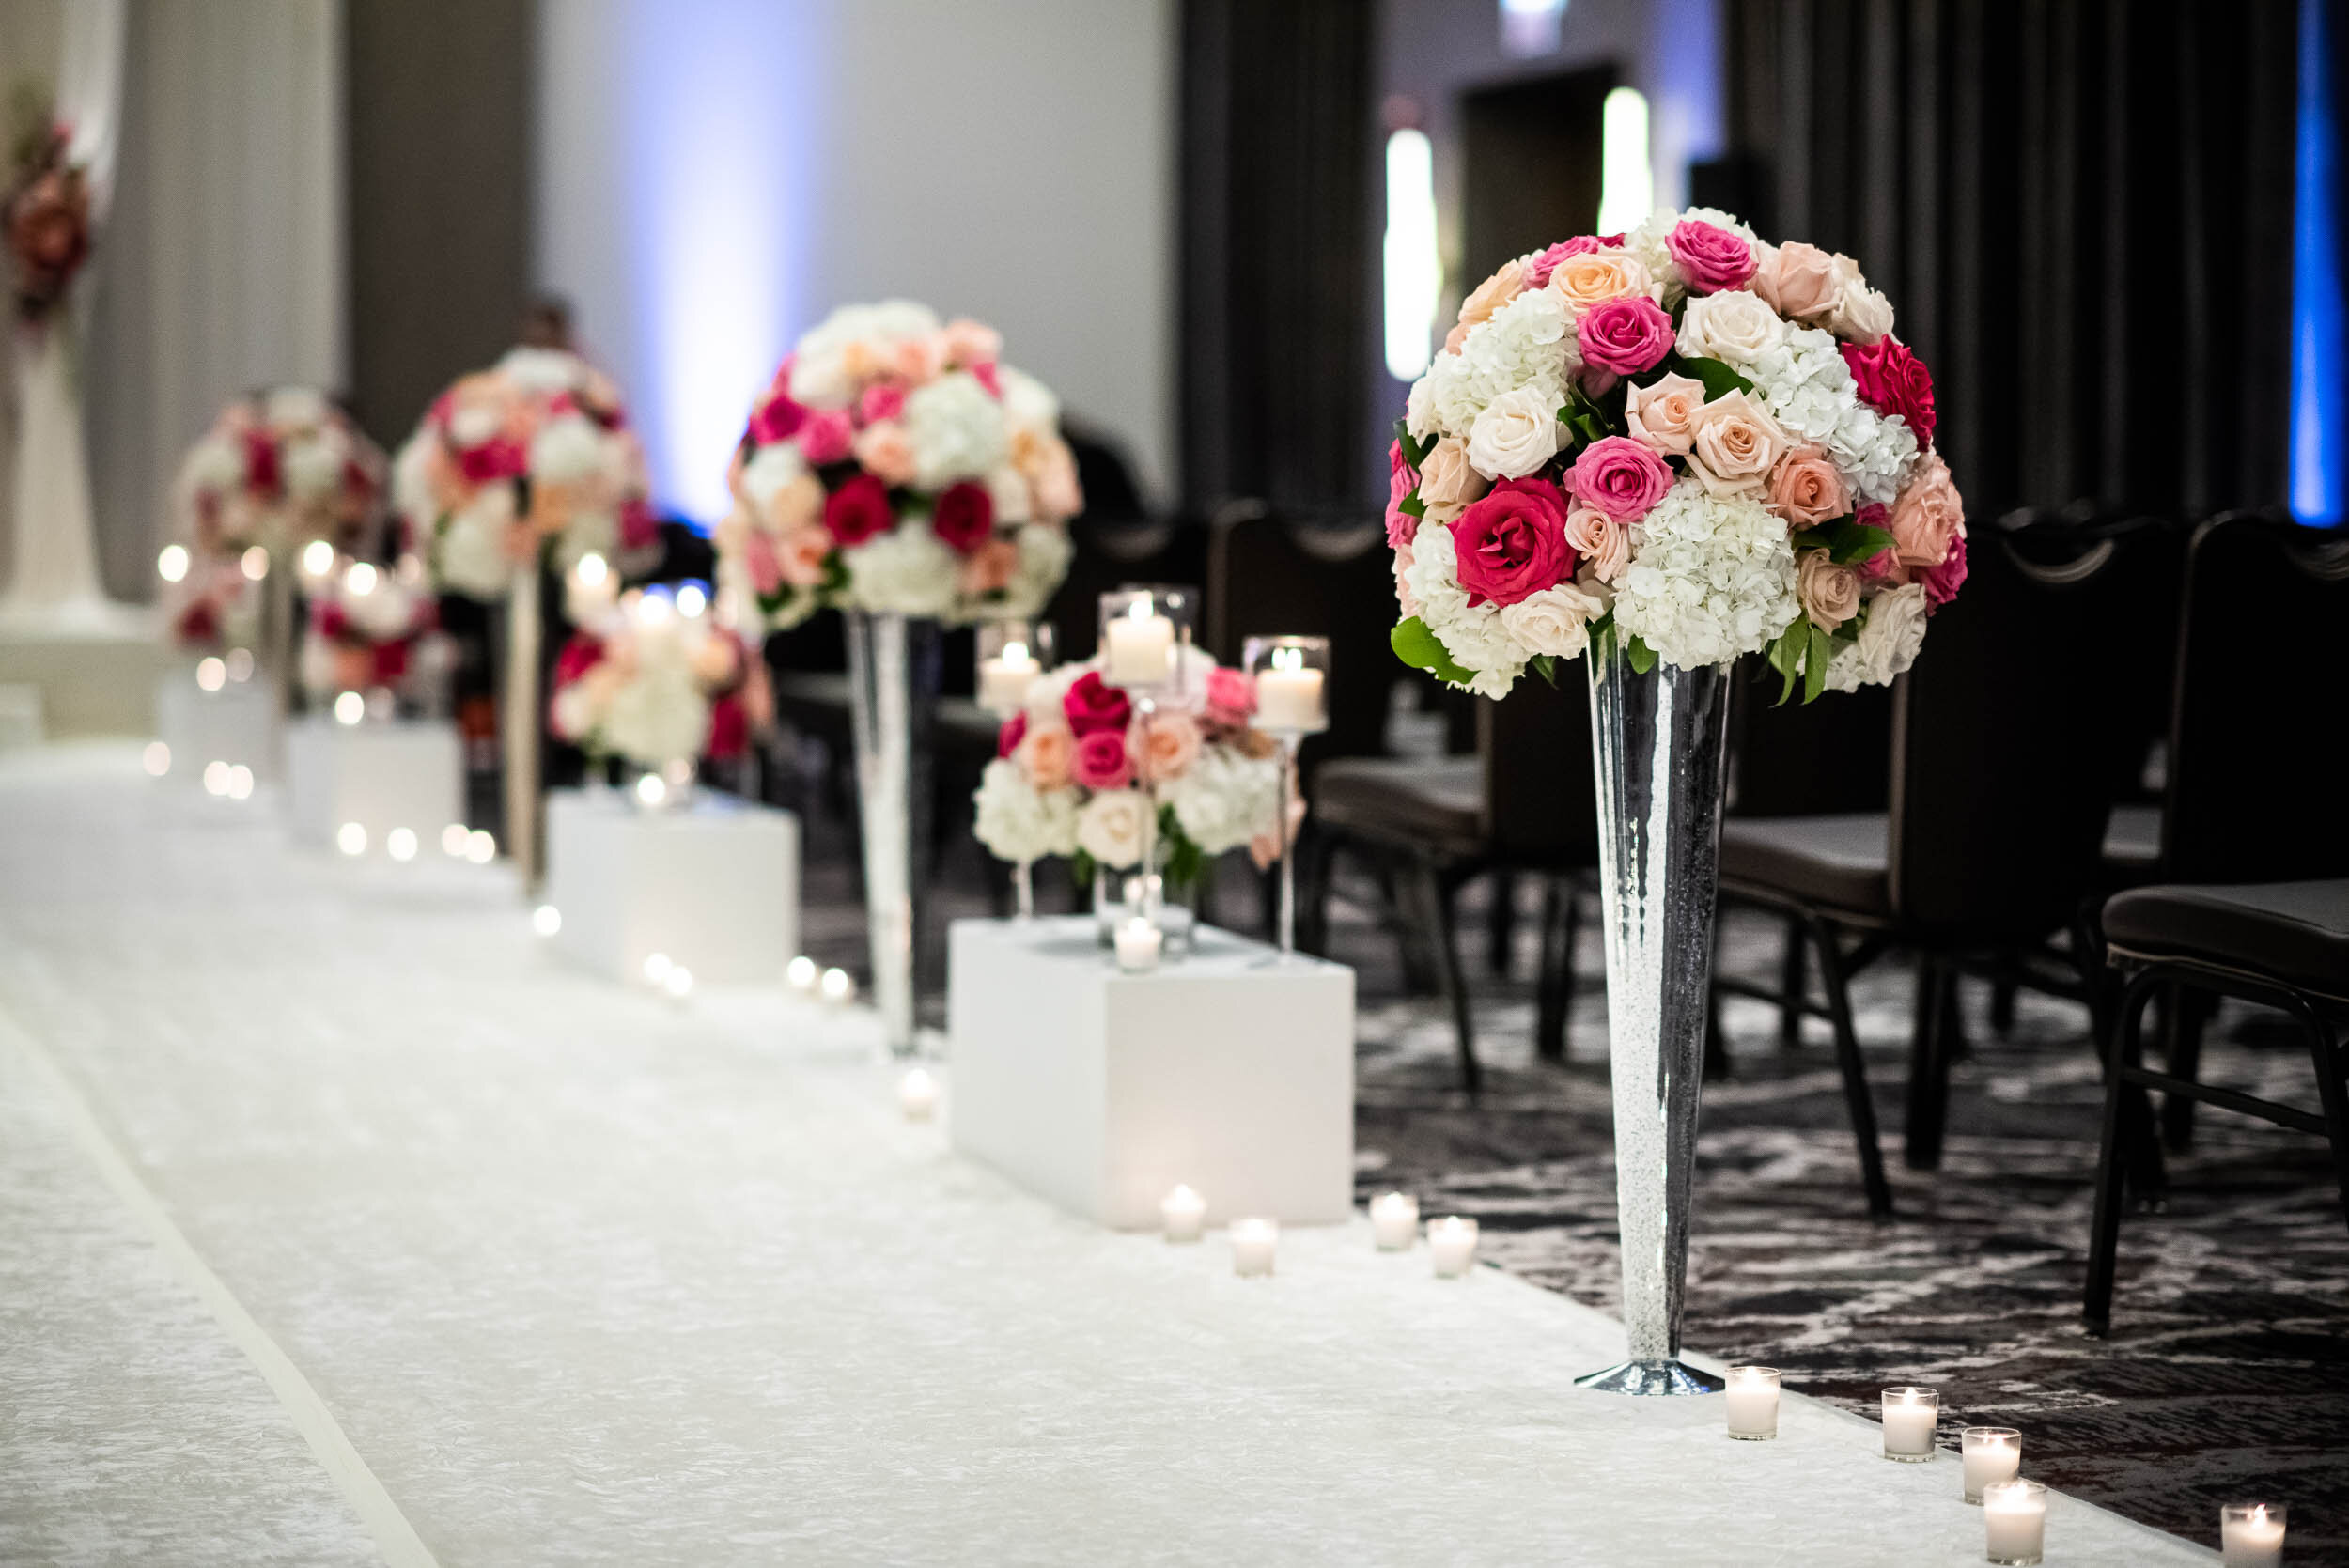 Pink and white wedding ceremony flowers: Loews Chicago Hotel Wedding captured by J. Brown Photography